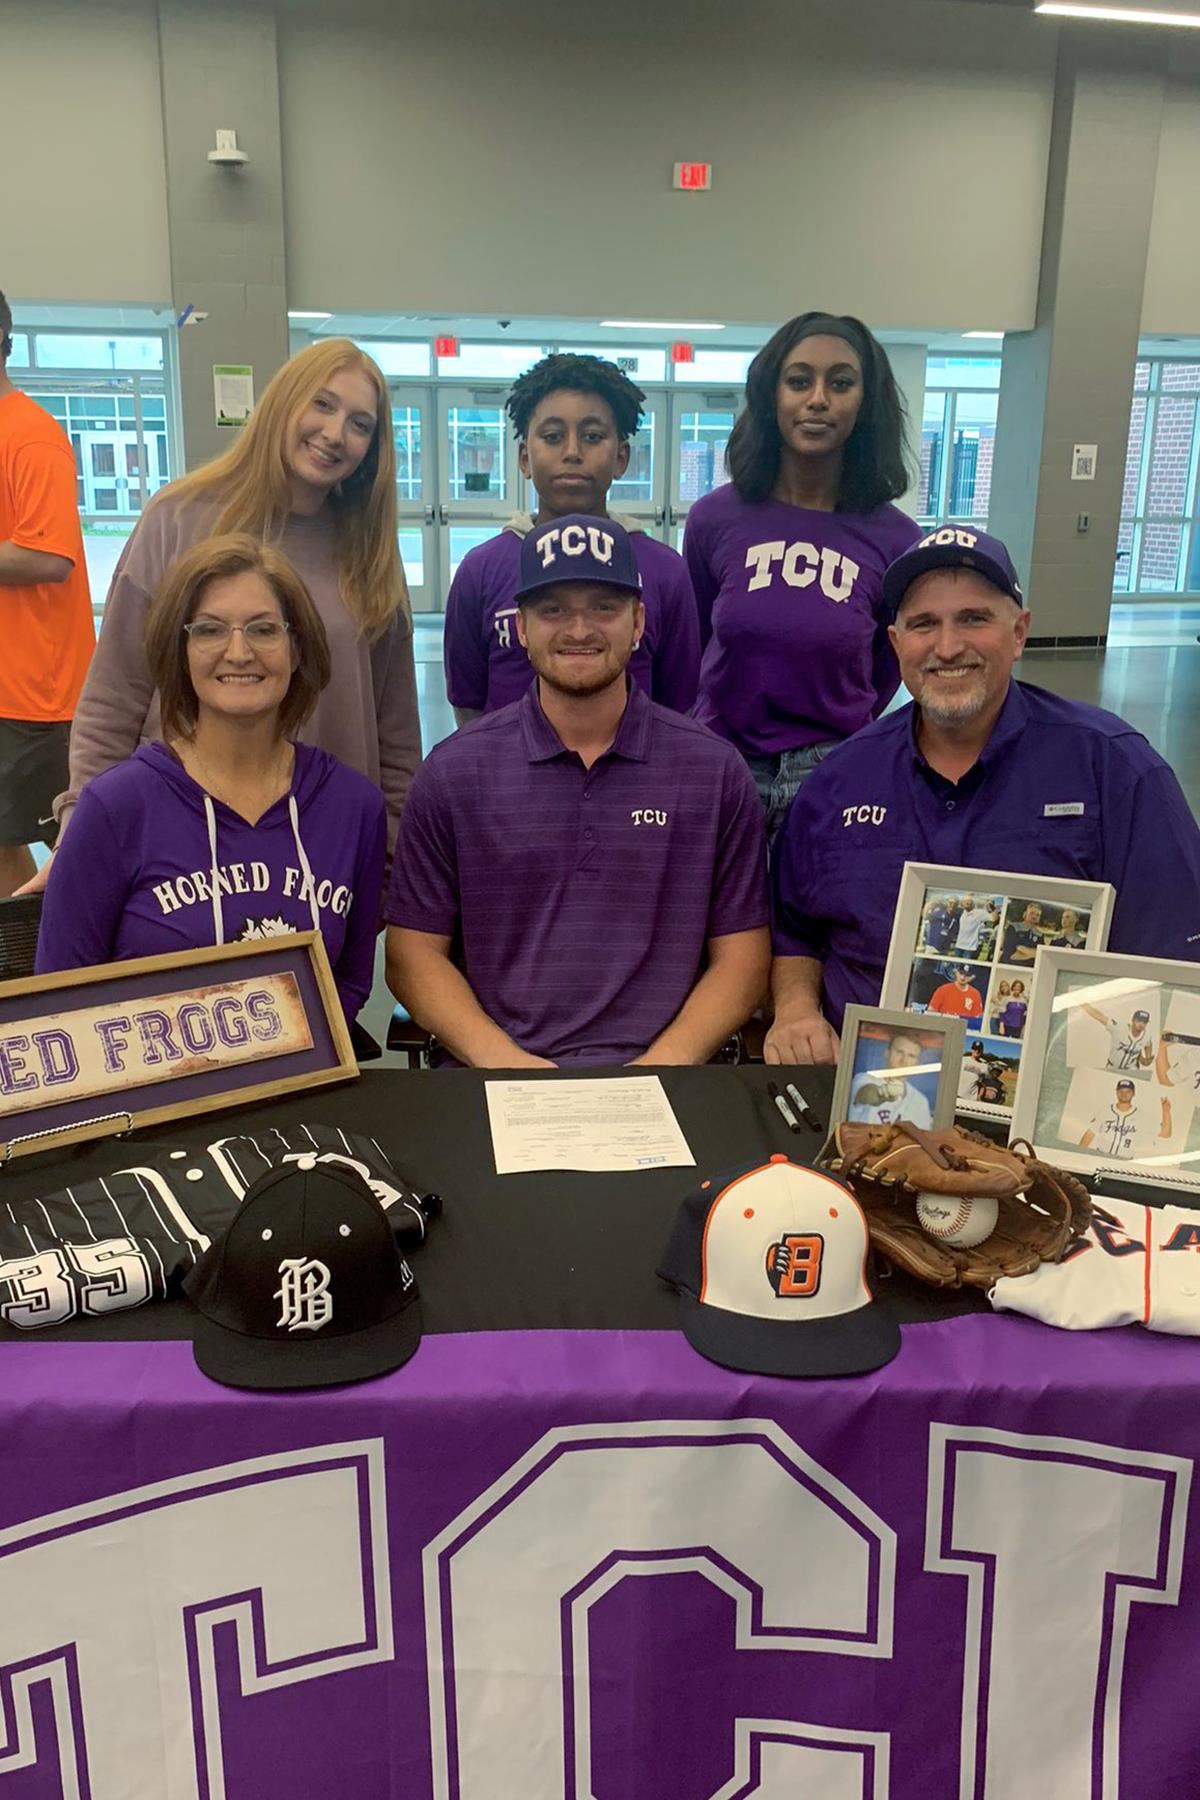 Bridgeland senior Murphy Brooks, seated center, signed a letter of intent to play baseball at Texas Christian University.